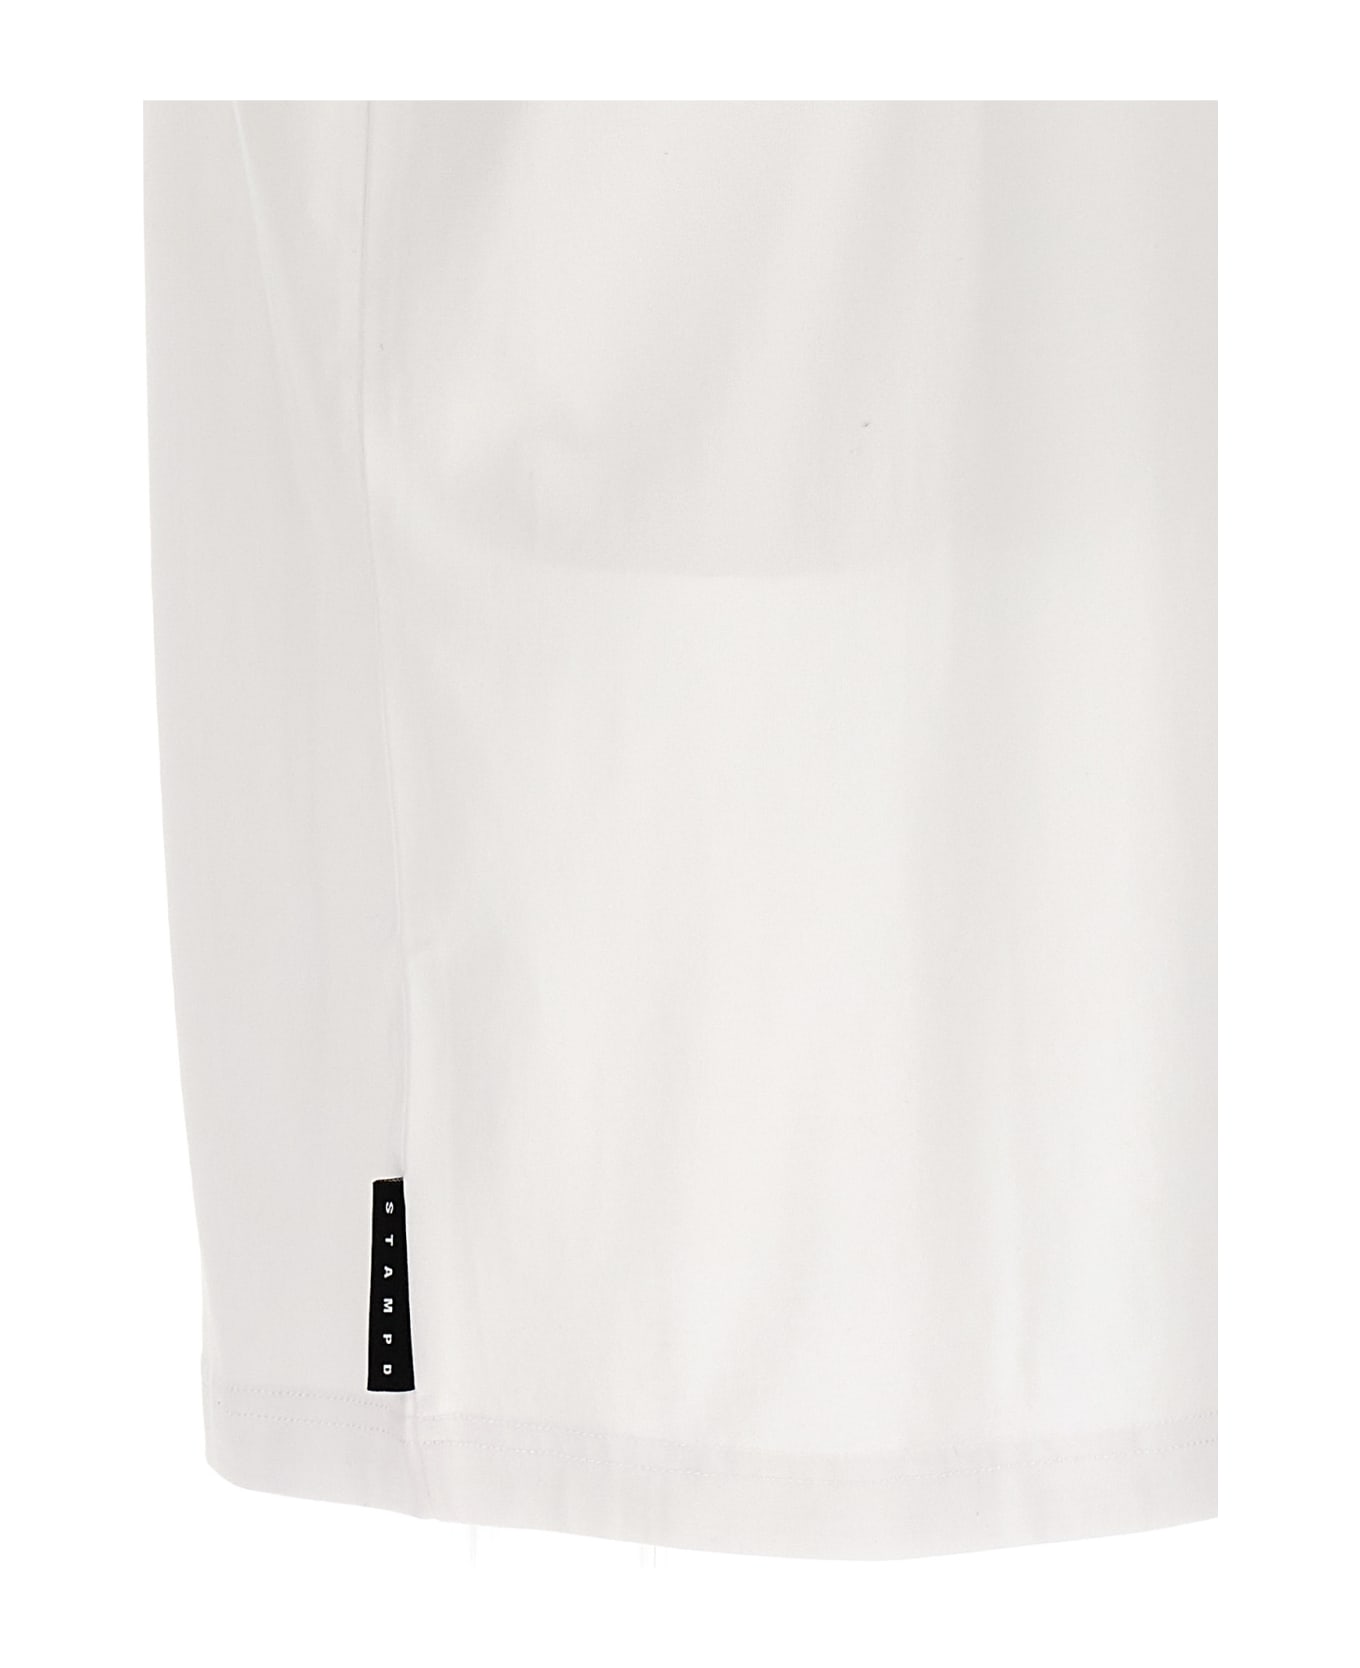 Stampd T-shirt 'stacked Logo' - White シャツ